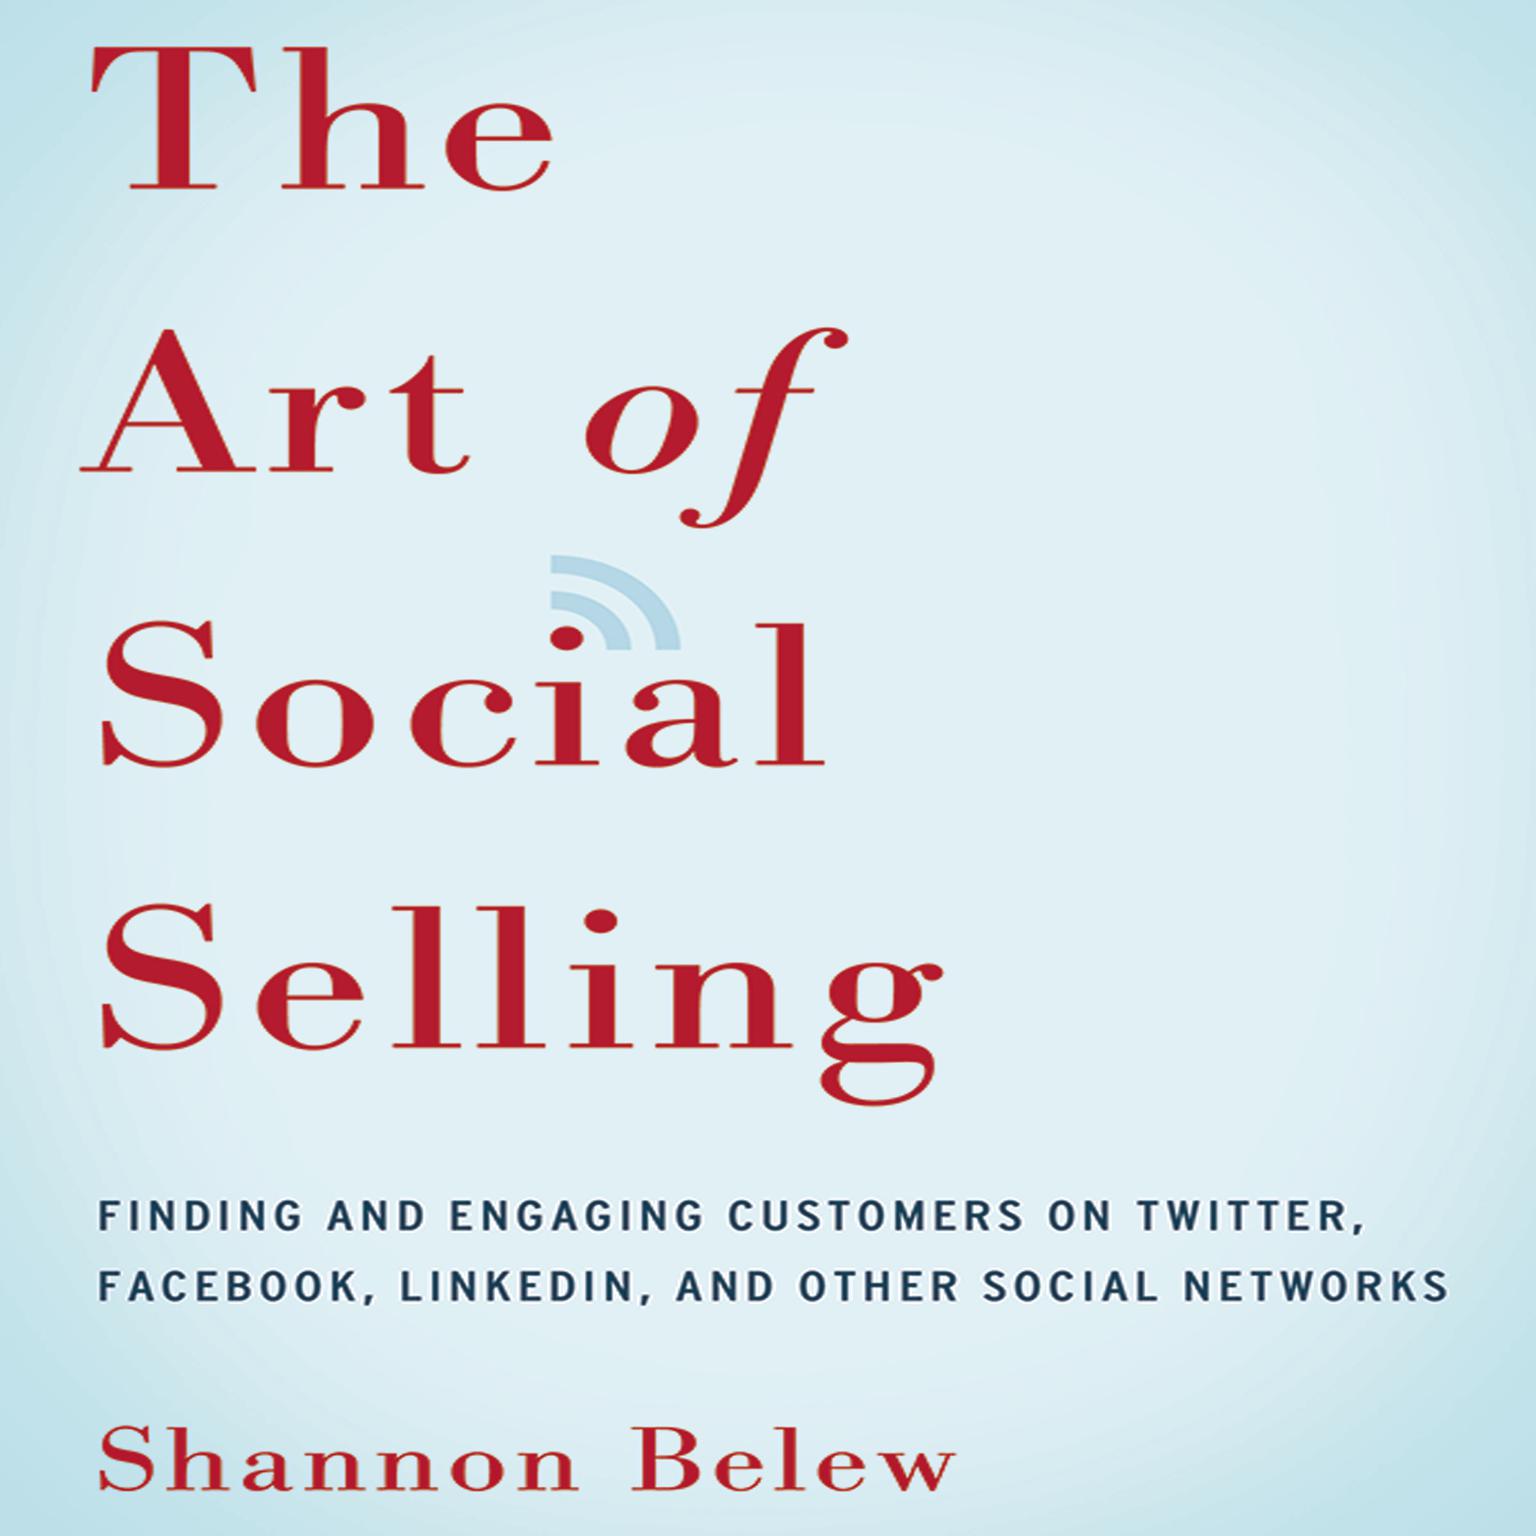 The Art of Social Selling: Finding and Engaging Customers on Twitter, Facebook, LinkedIn, and Other Social Networks Audiobook, by Shannon Belew